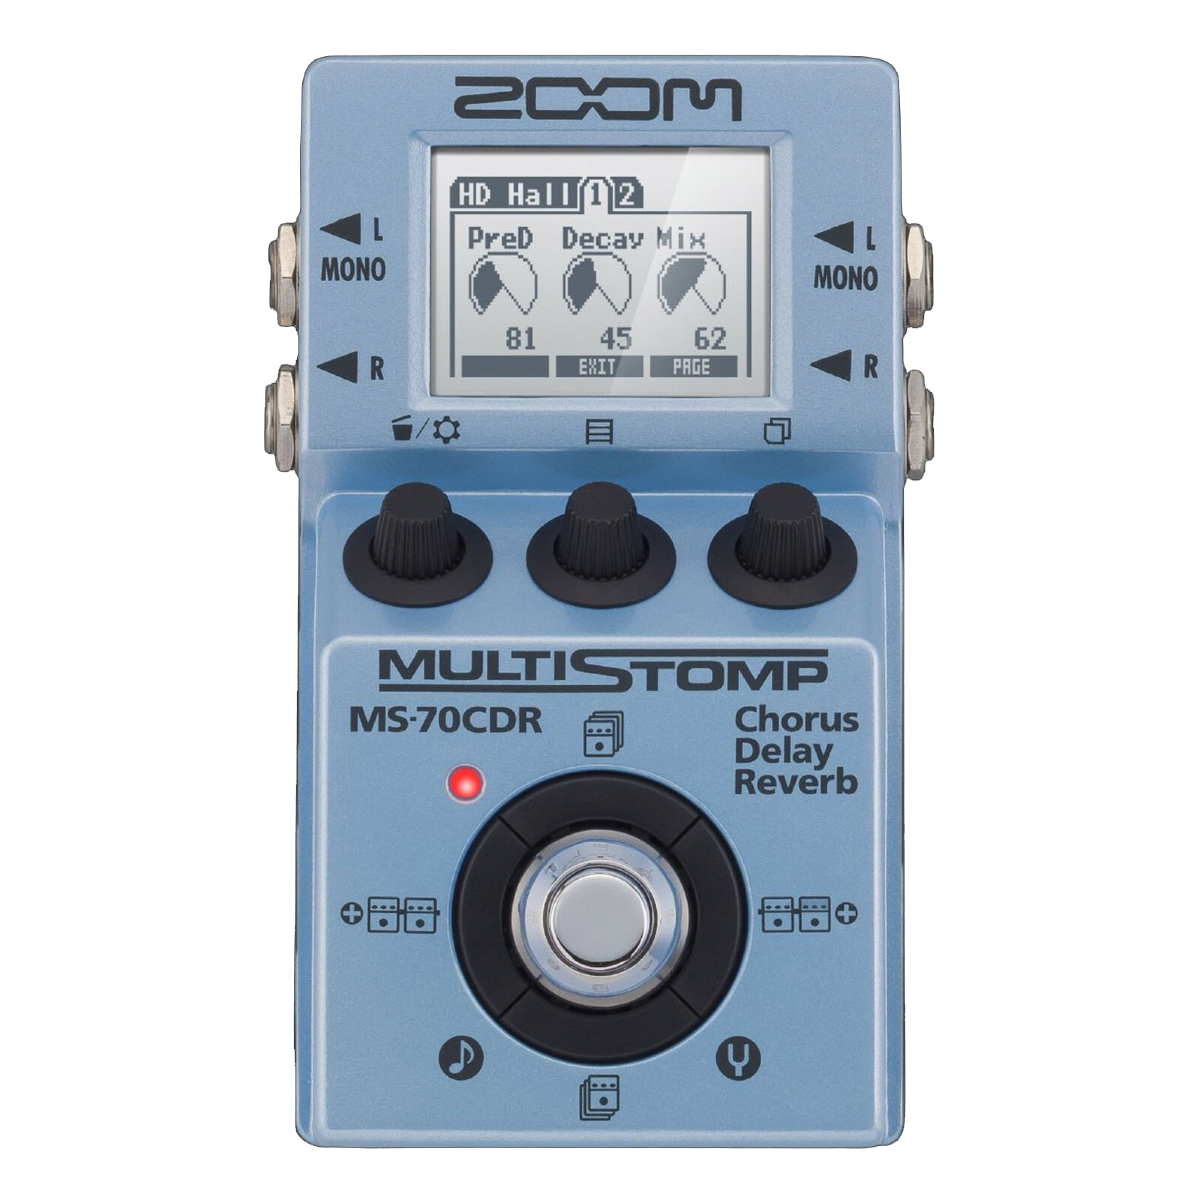 Zoom MS-70CDR MultiStomp Chorus/Delay/Reverb Pedal (ZMS70CDR)